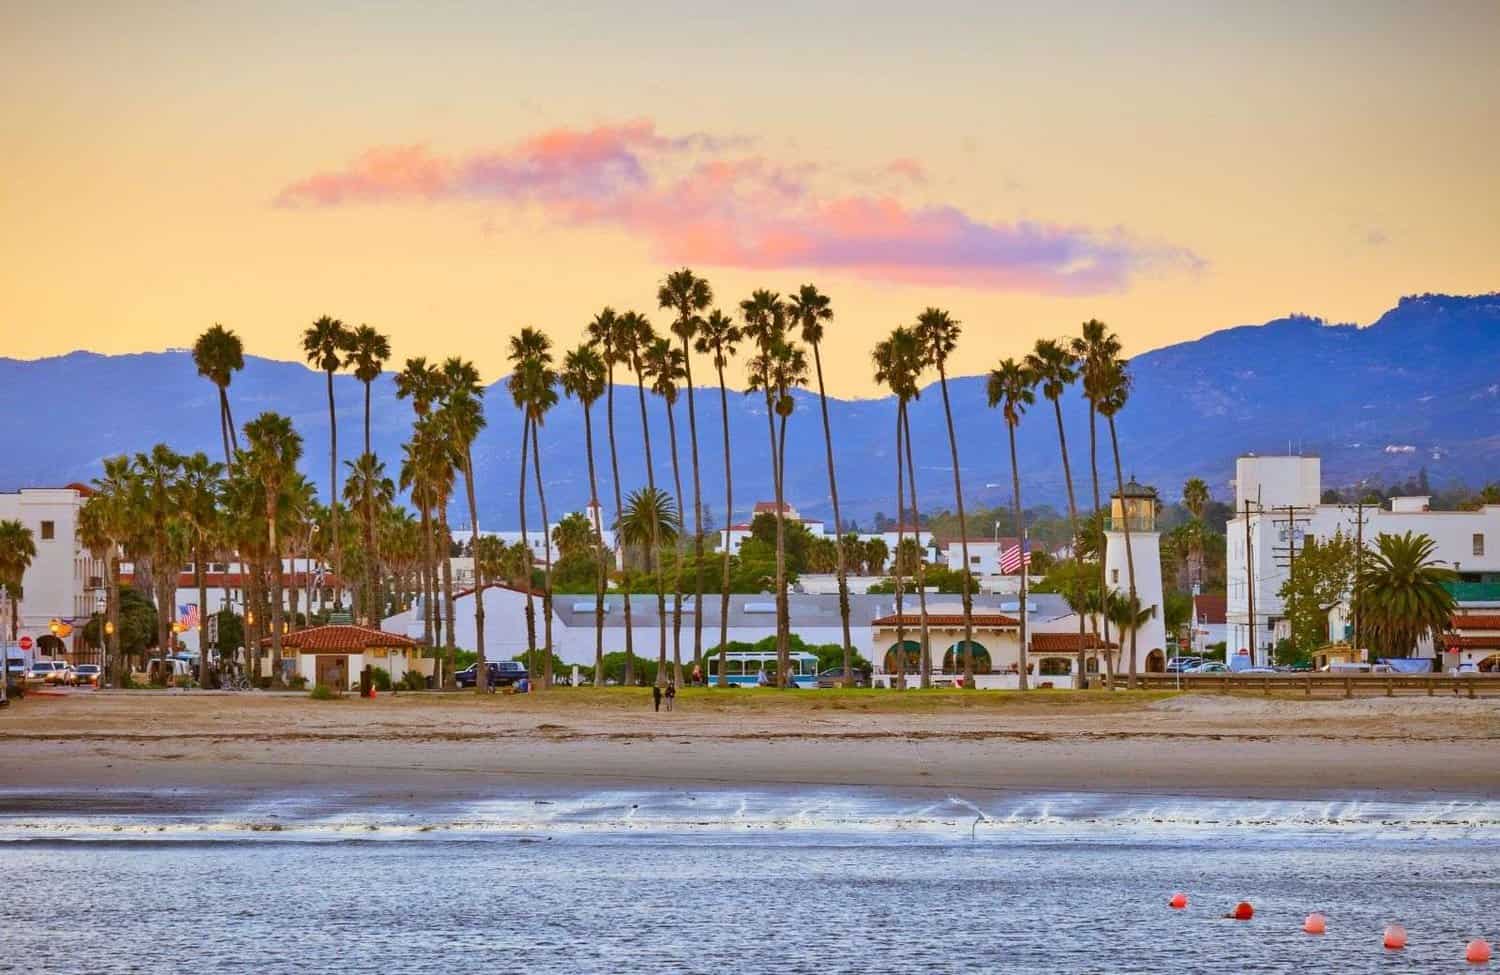 The Best Beach Towns in California 12 Amazing Locations! Disha Discovers